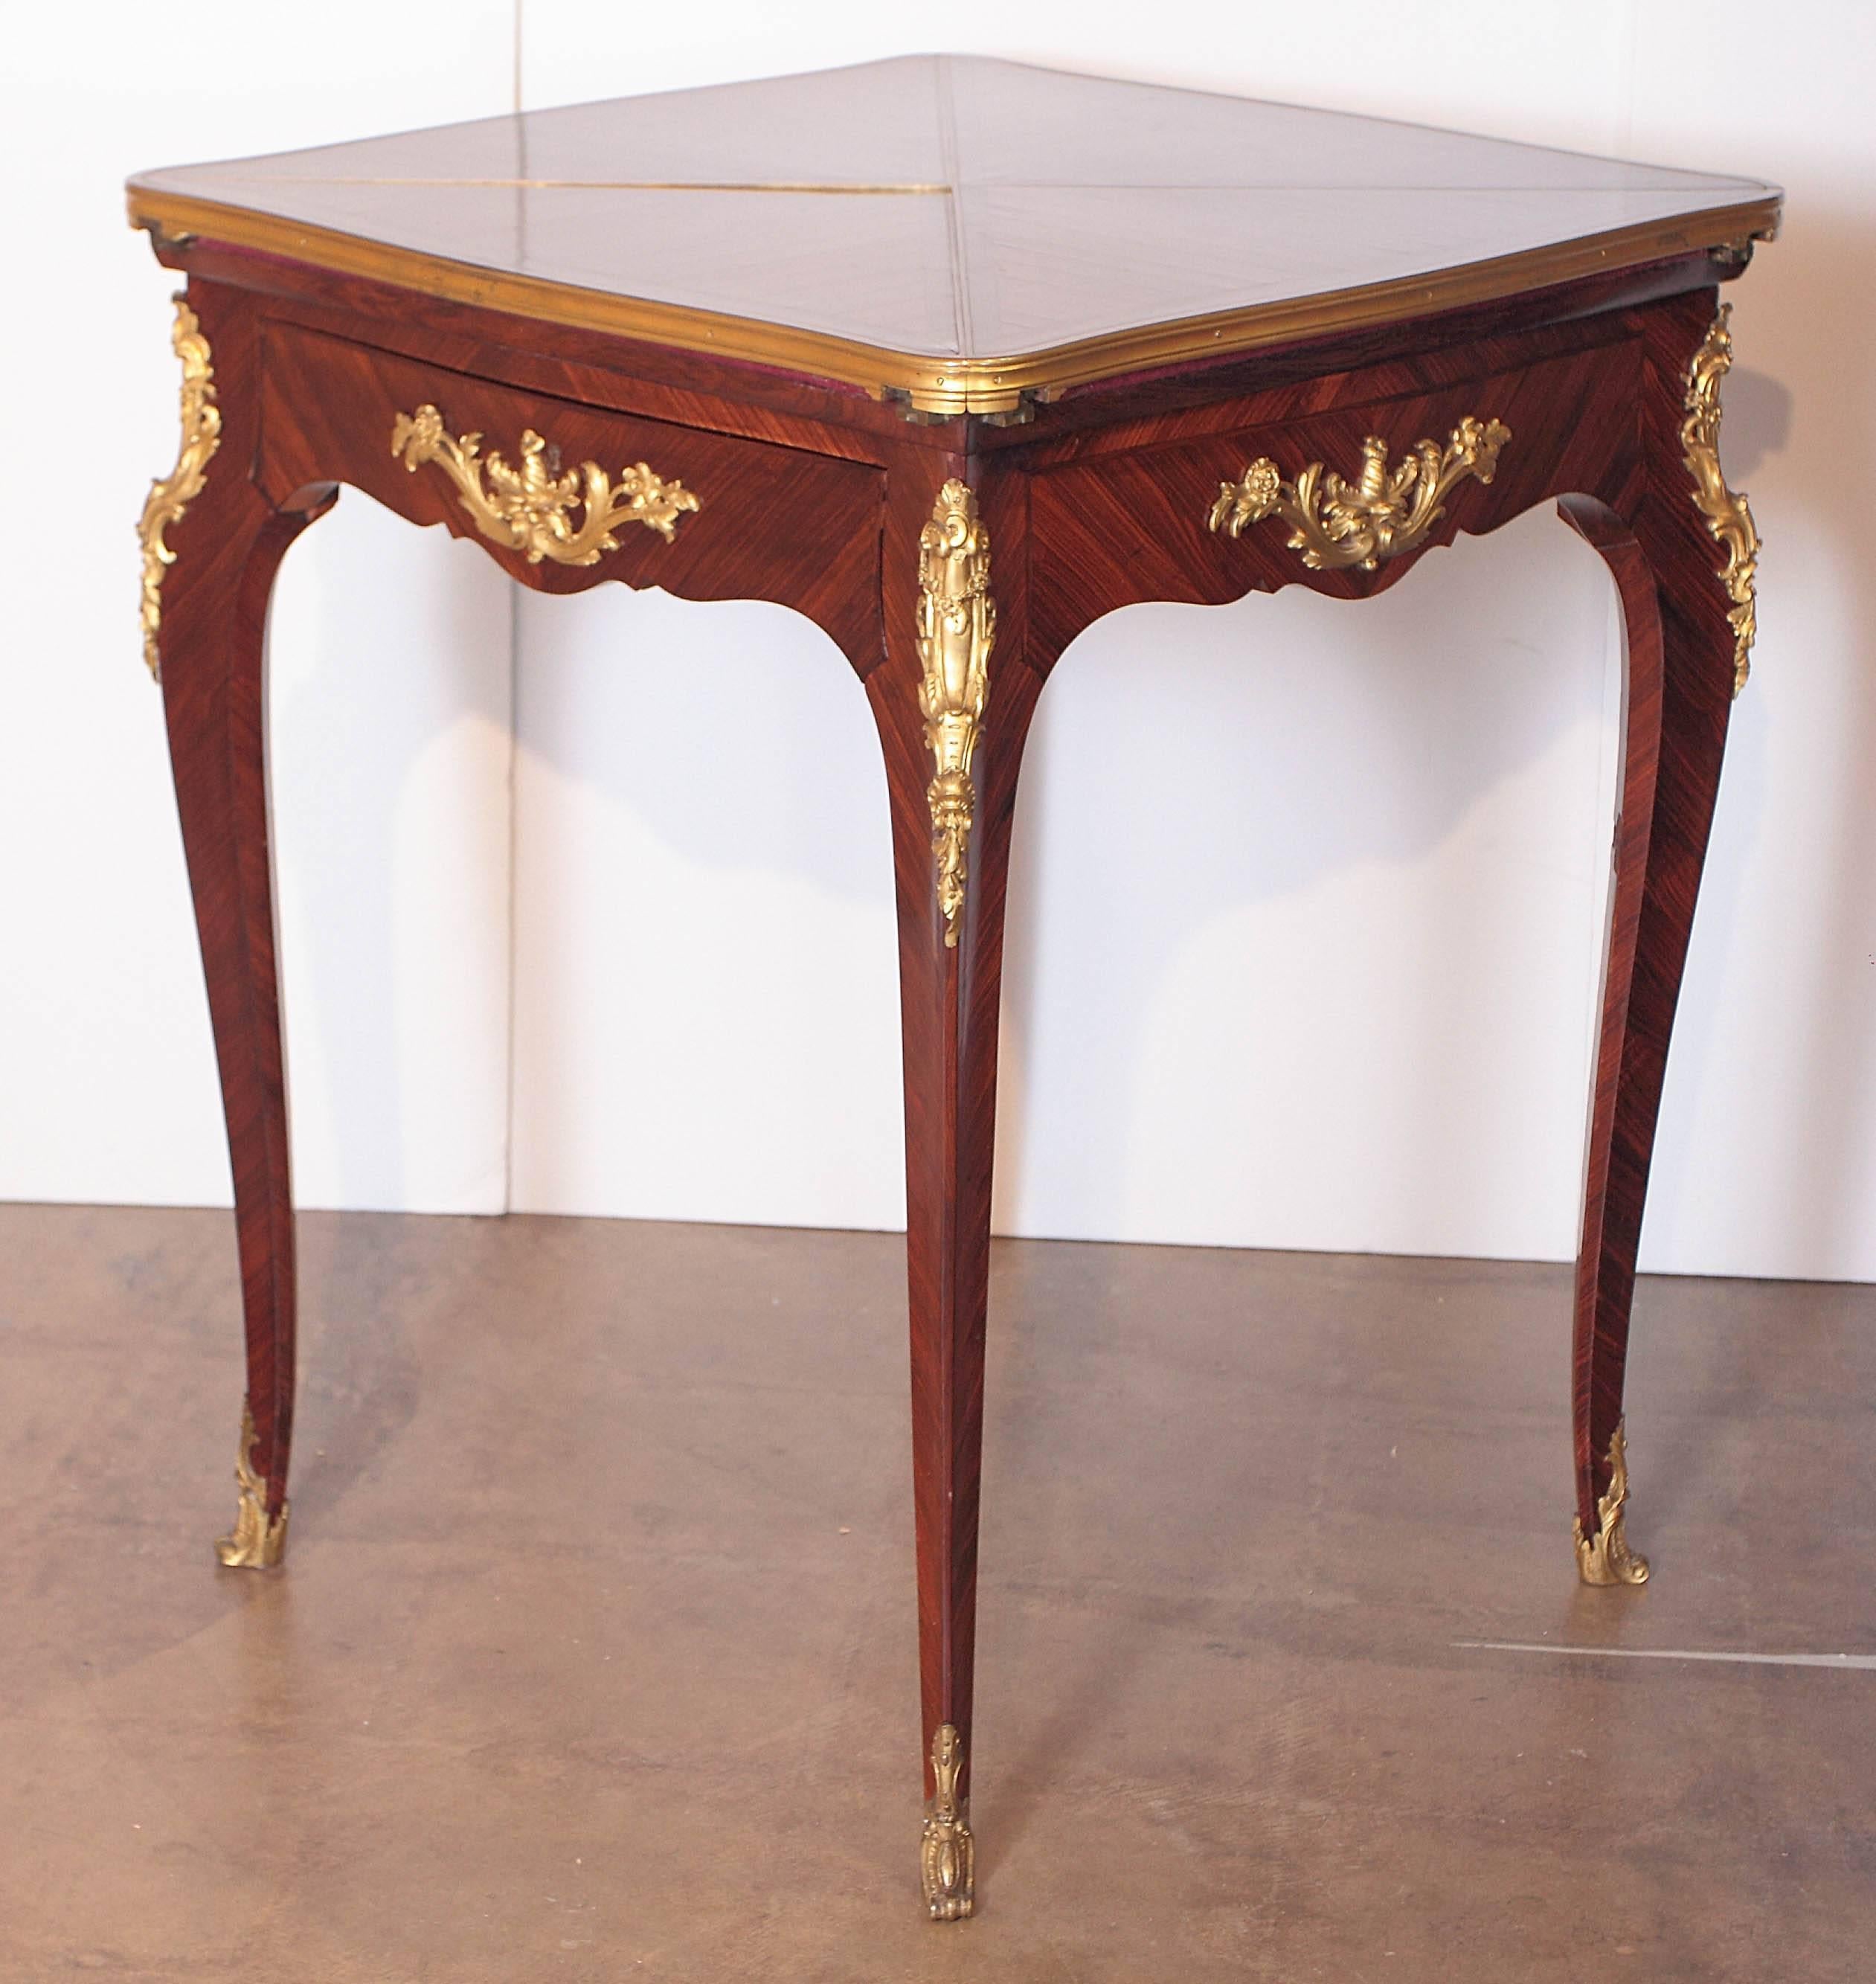 Very fine signed Paul Sormani French Louis XV king wood game table. Envelope designed top opens and swivels for a felt lined game surface. Single drawer signed P Sormani in the lock plate. Fine gilt bronze mounts.